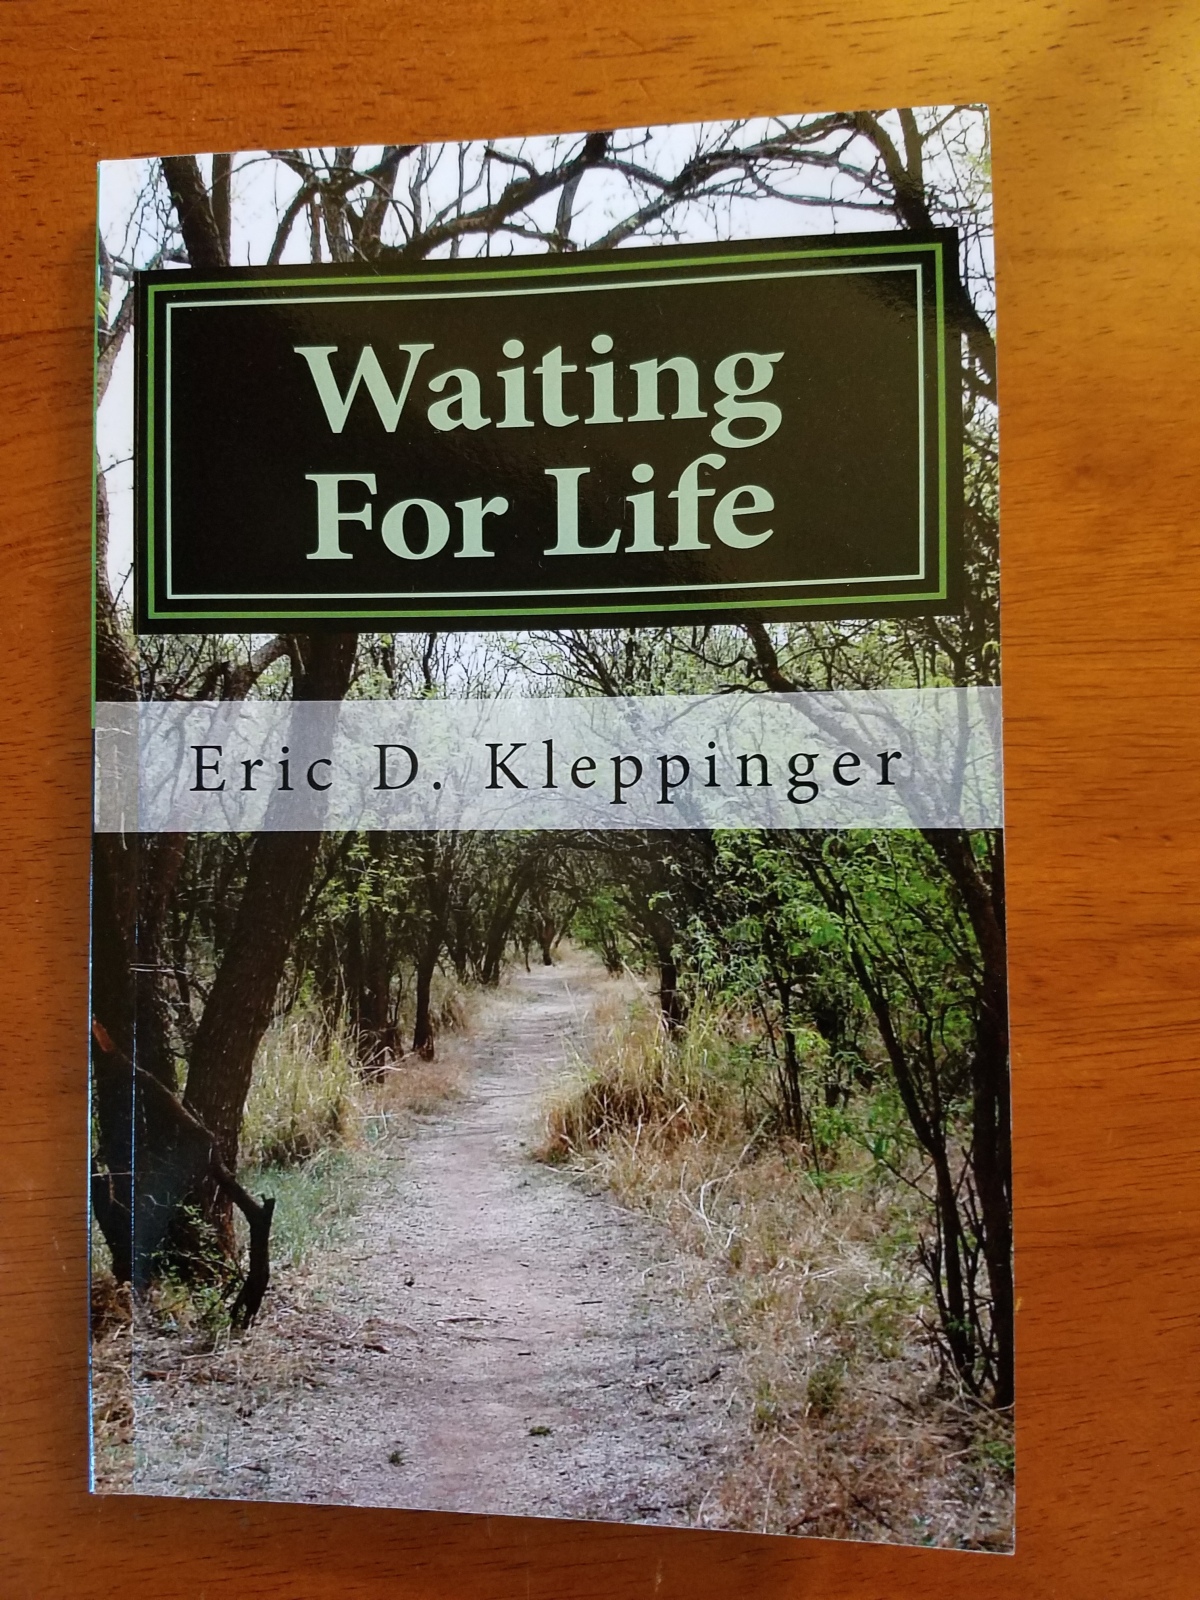 “Waiting For Life”–THE BOOK!